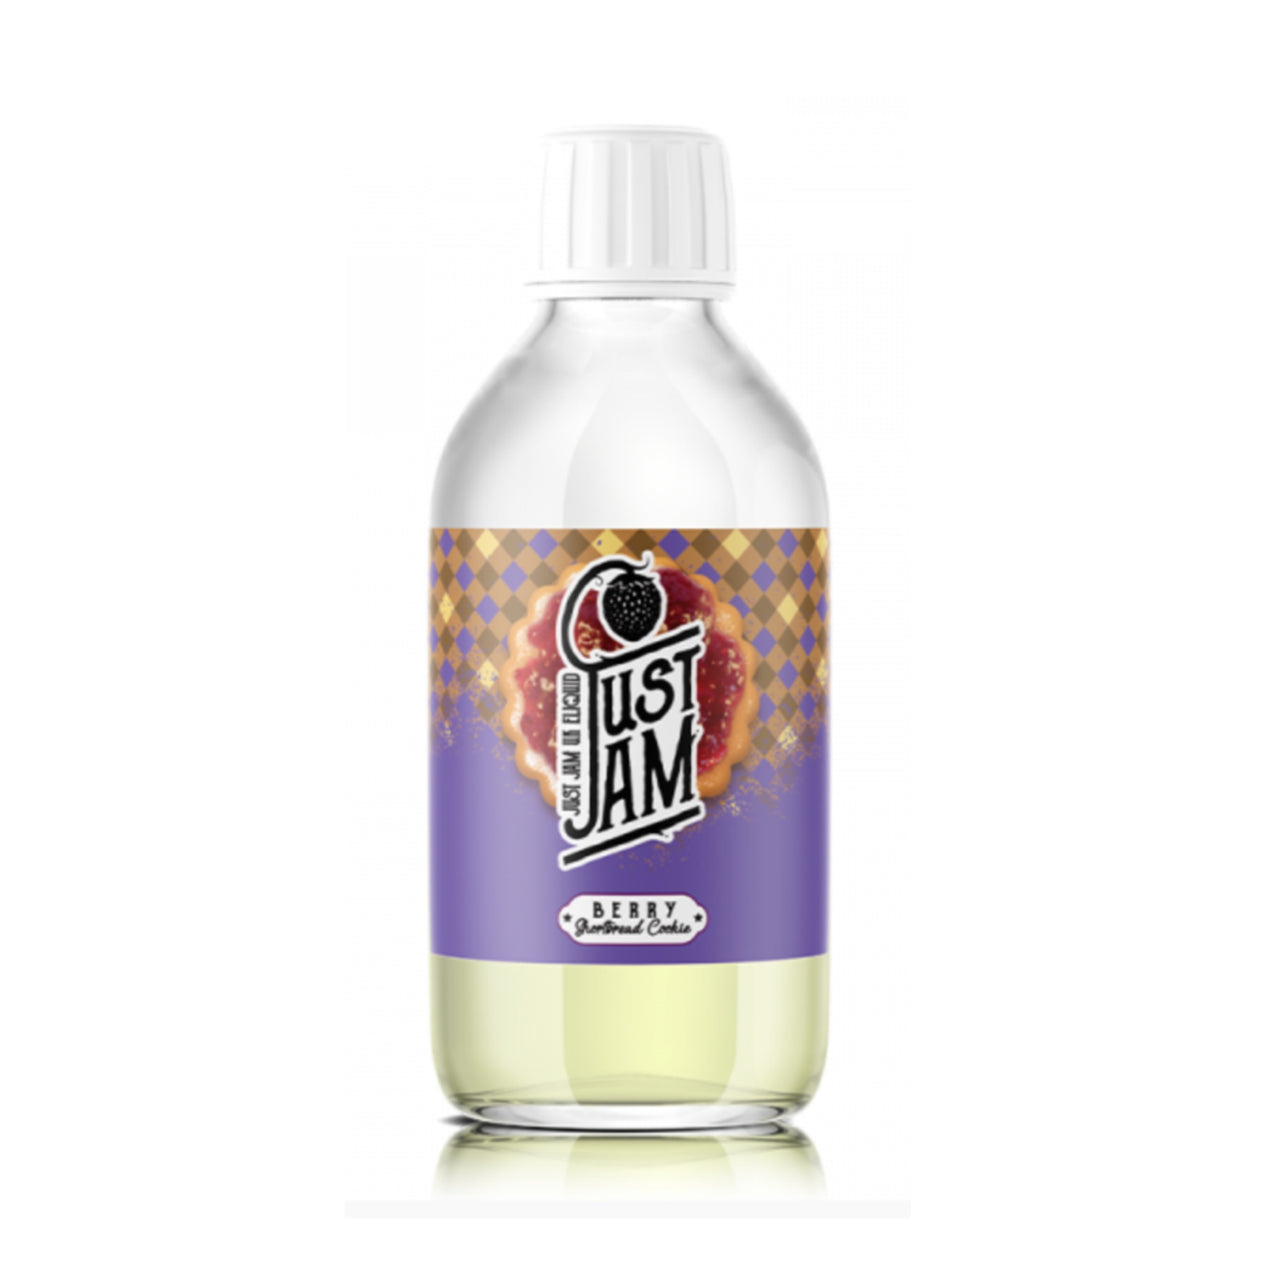 Berry Shortbread Cookie 200ml By Just Jam